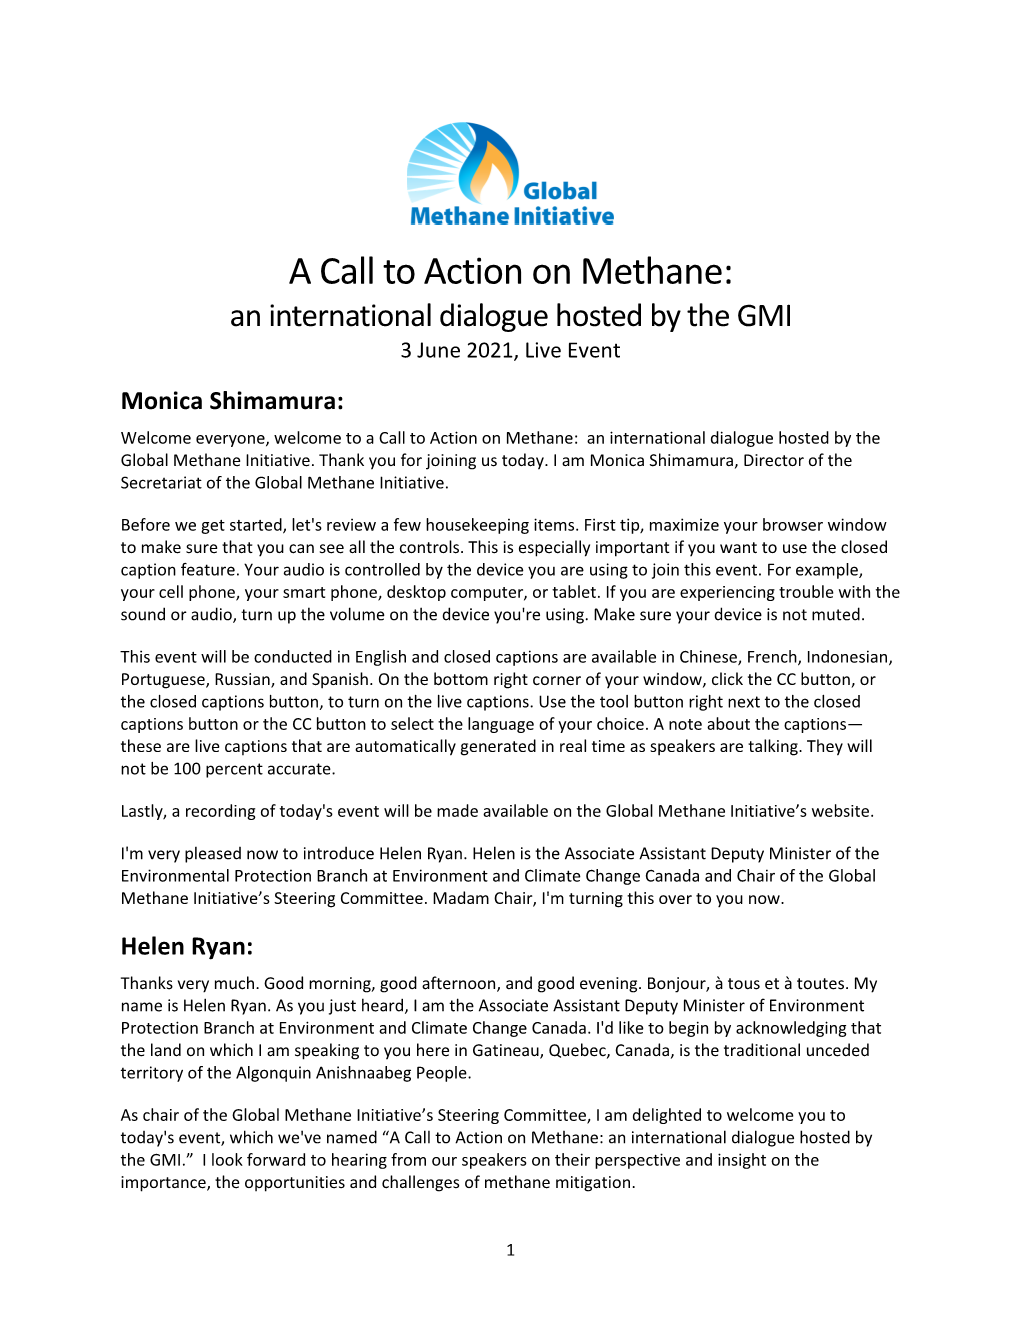 A Call to Action on Methane: an International Dialogue Hosted by the GMI 3 June 2021, Live Event